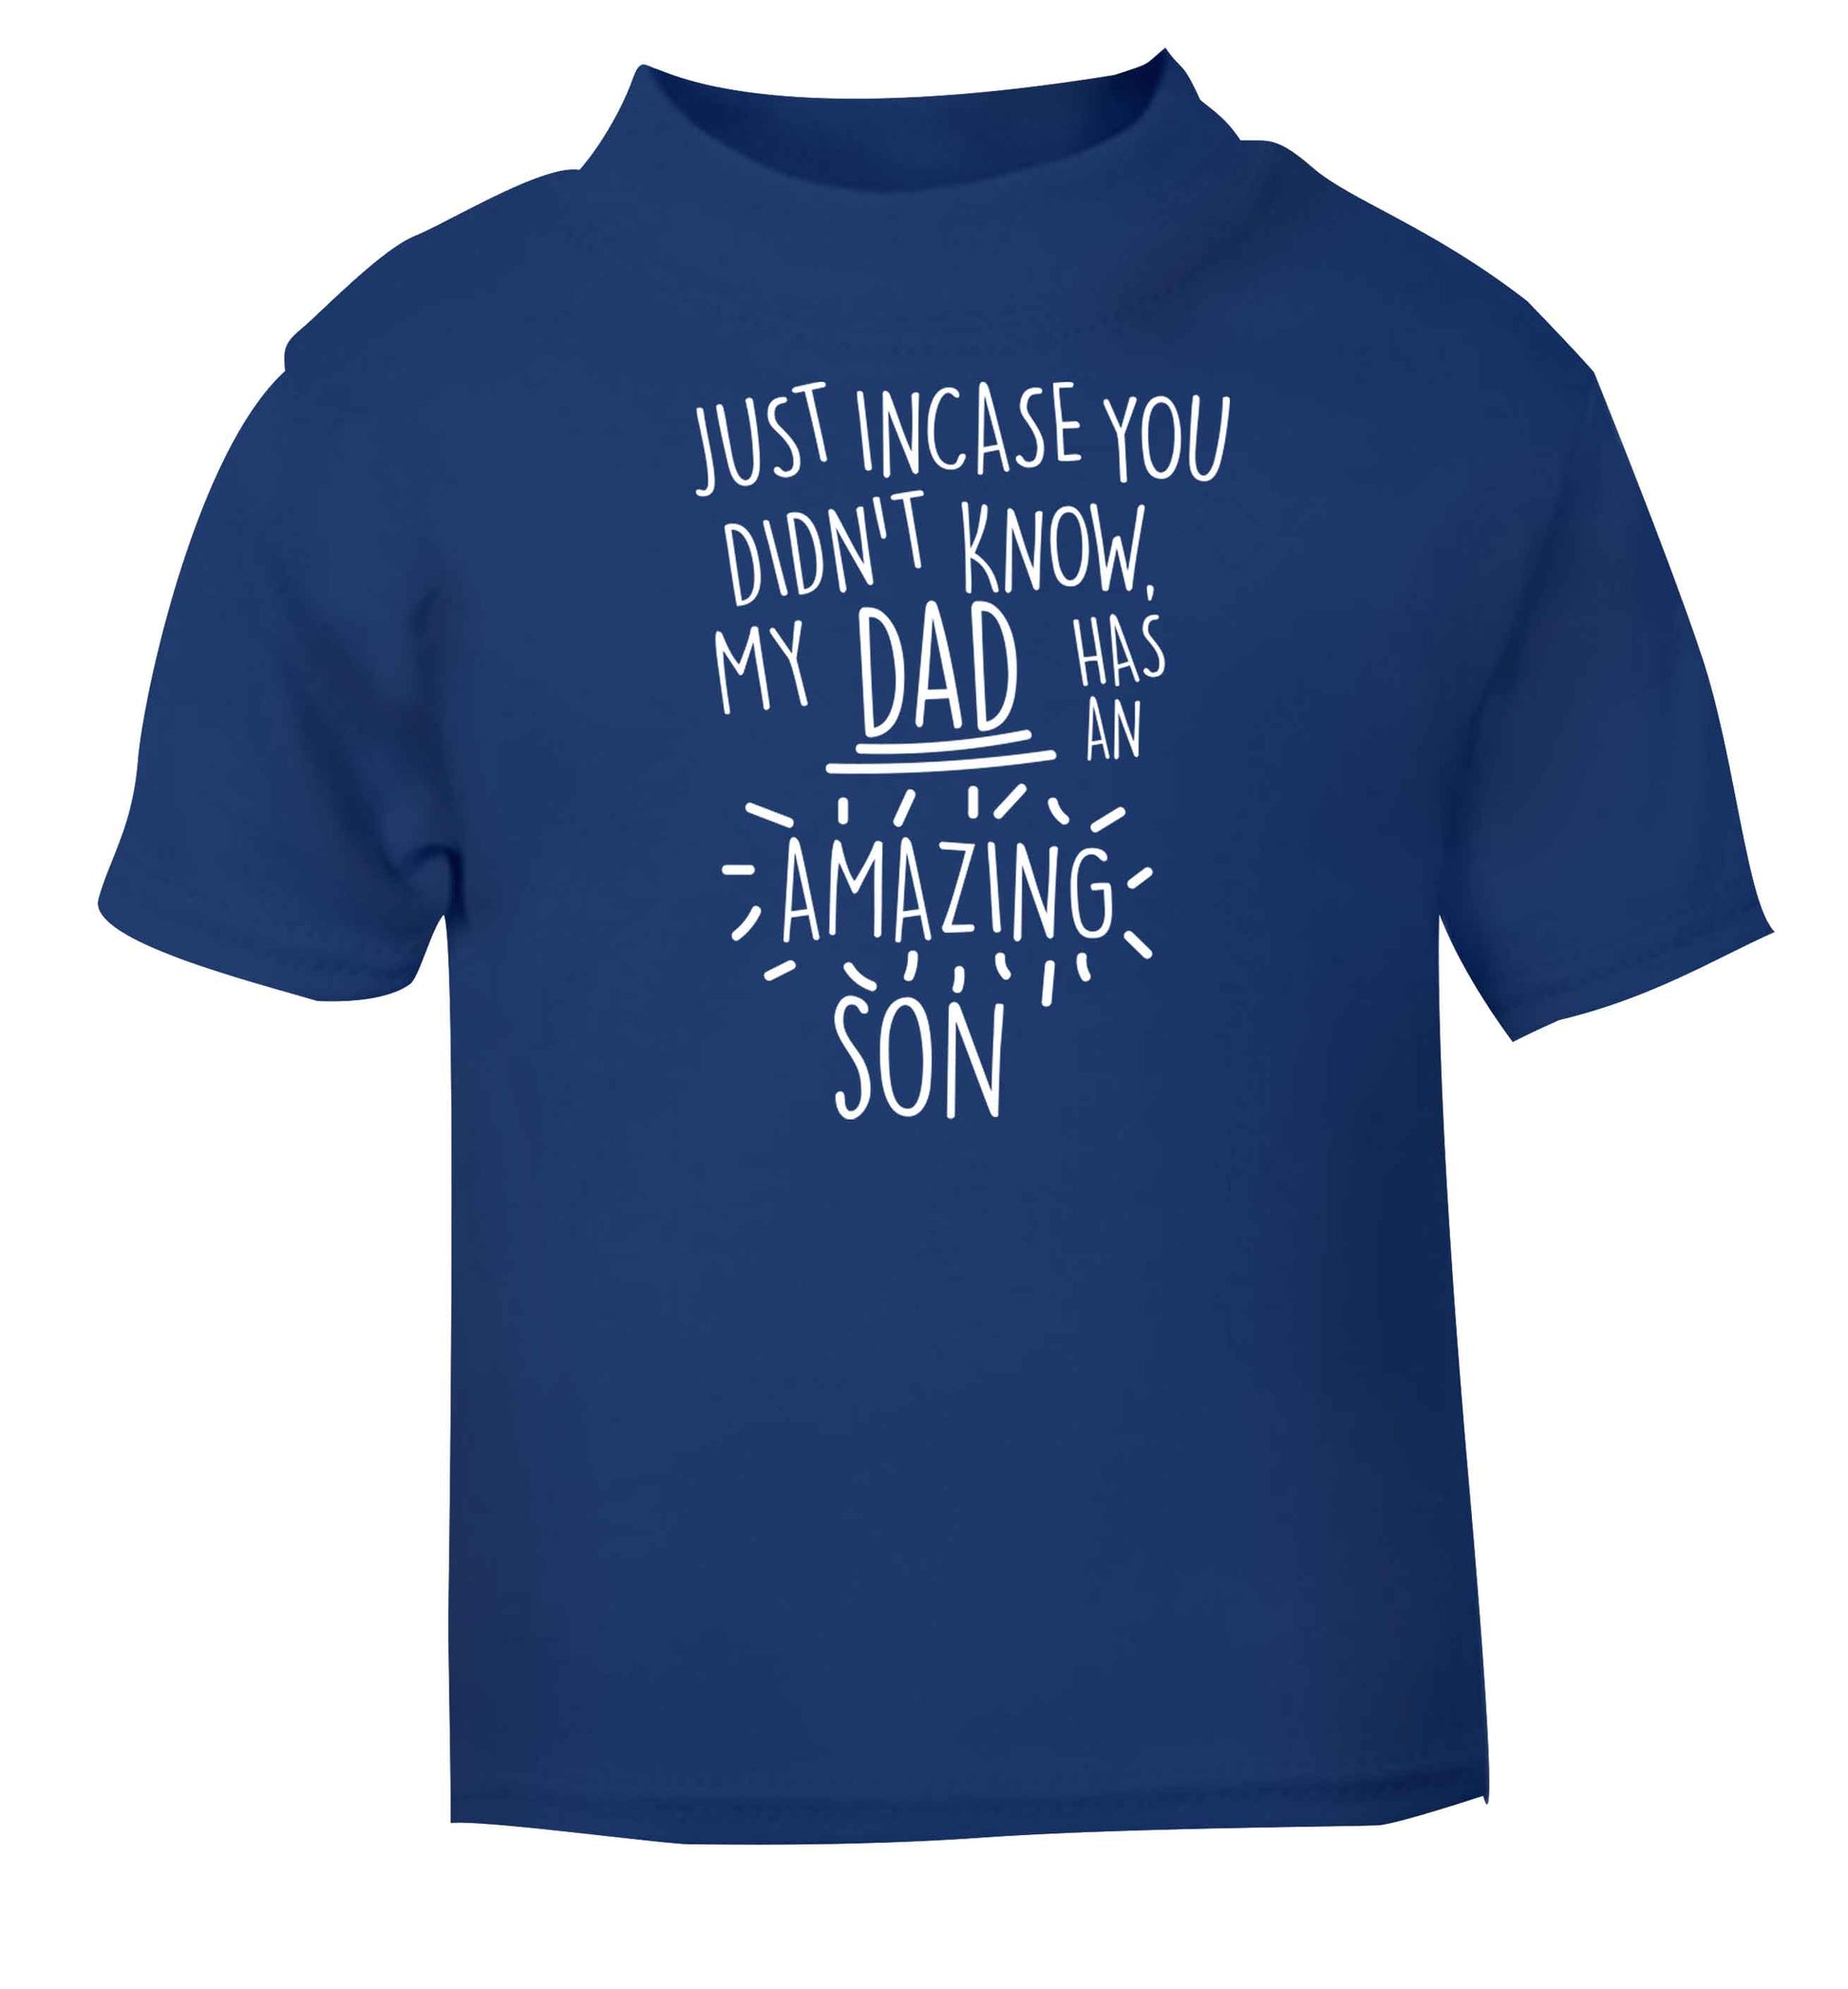 Just incase you didn't know my dad has an amazing son blue baby toddler Tshirt 2 Years